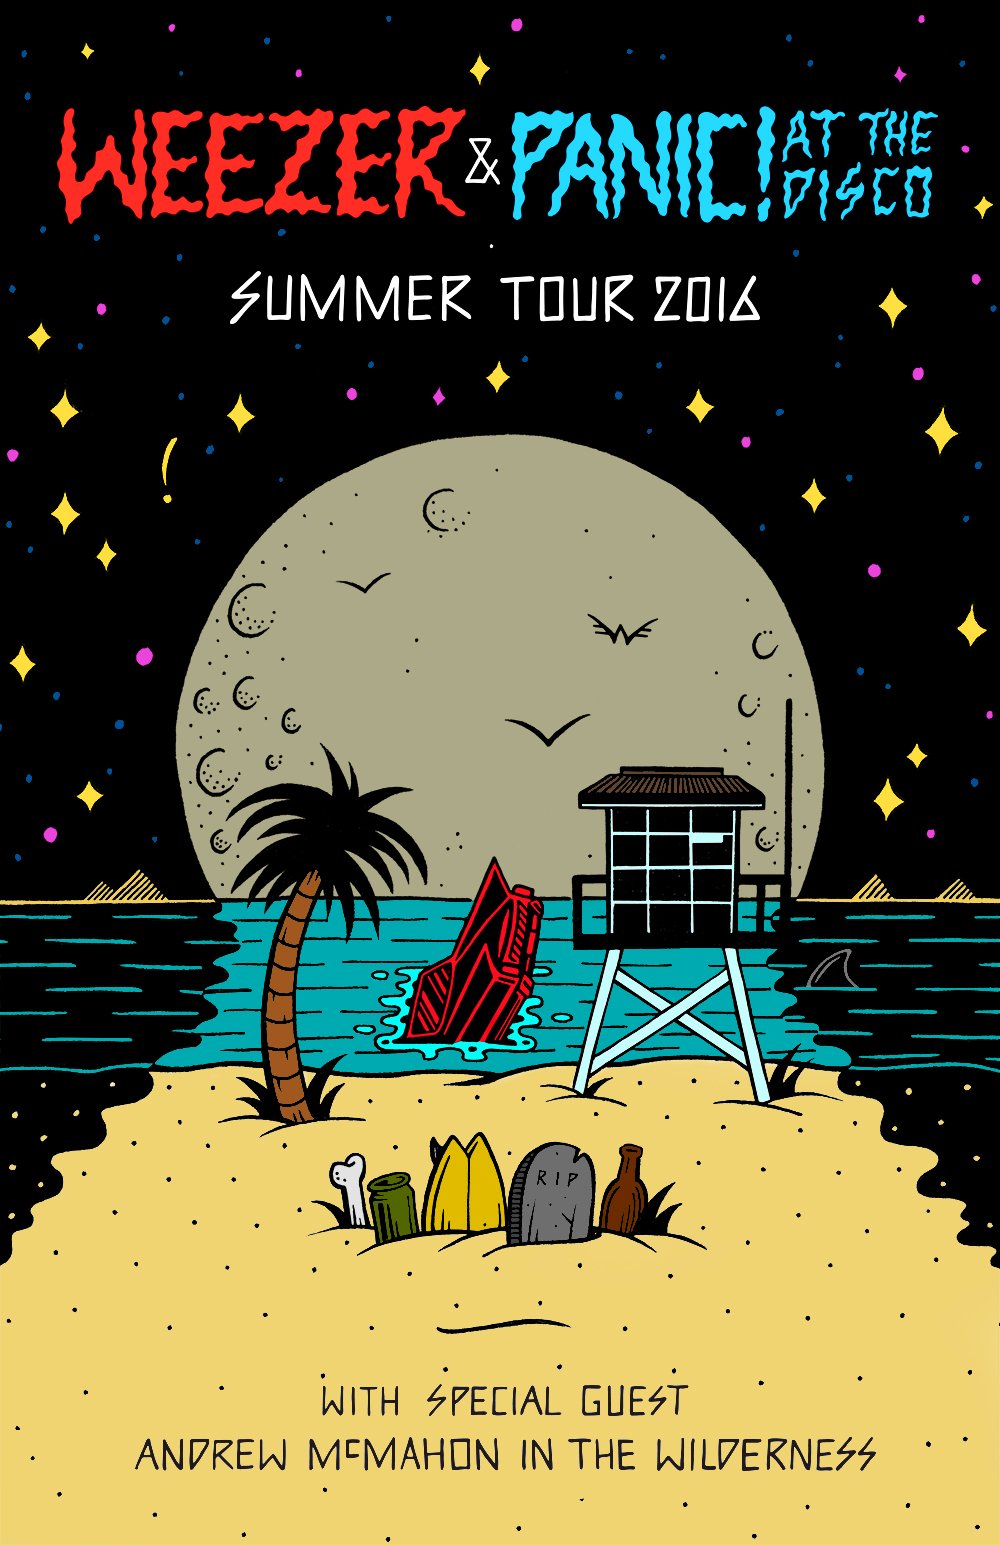 Joining the Weezer and Panic! At The Disco Summer Tour 2016